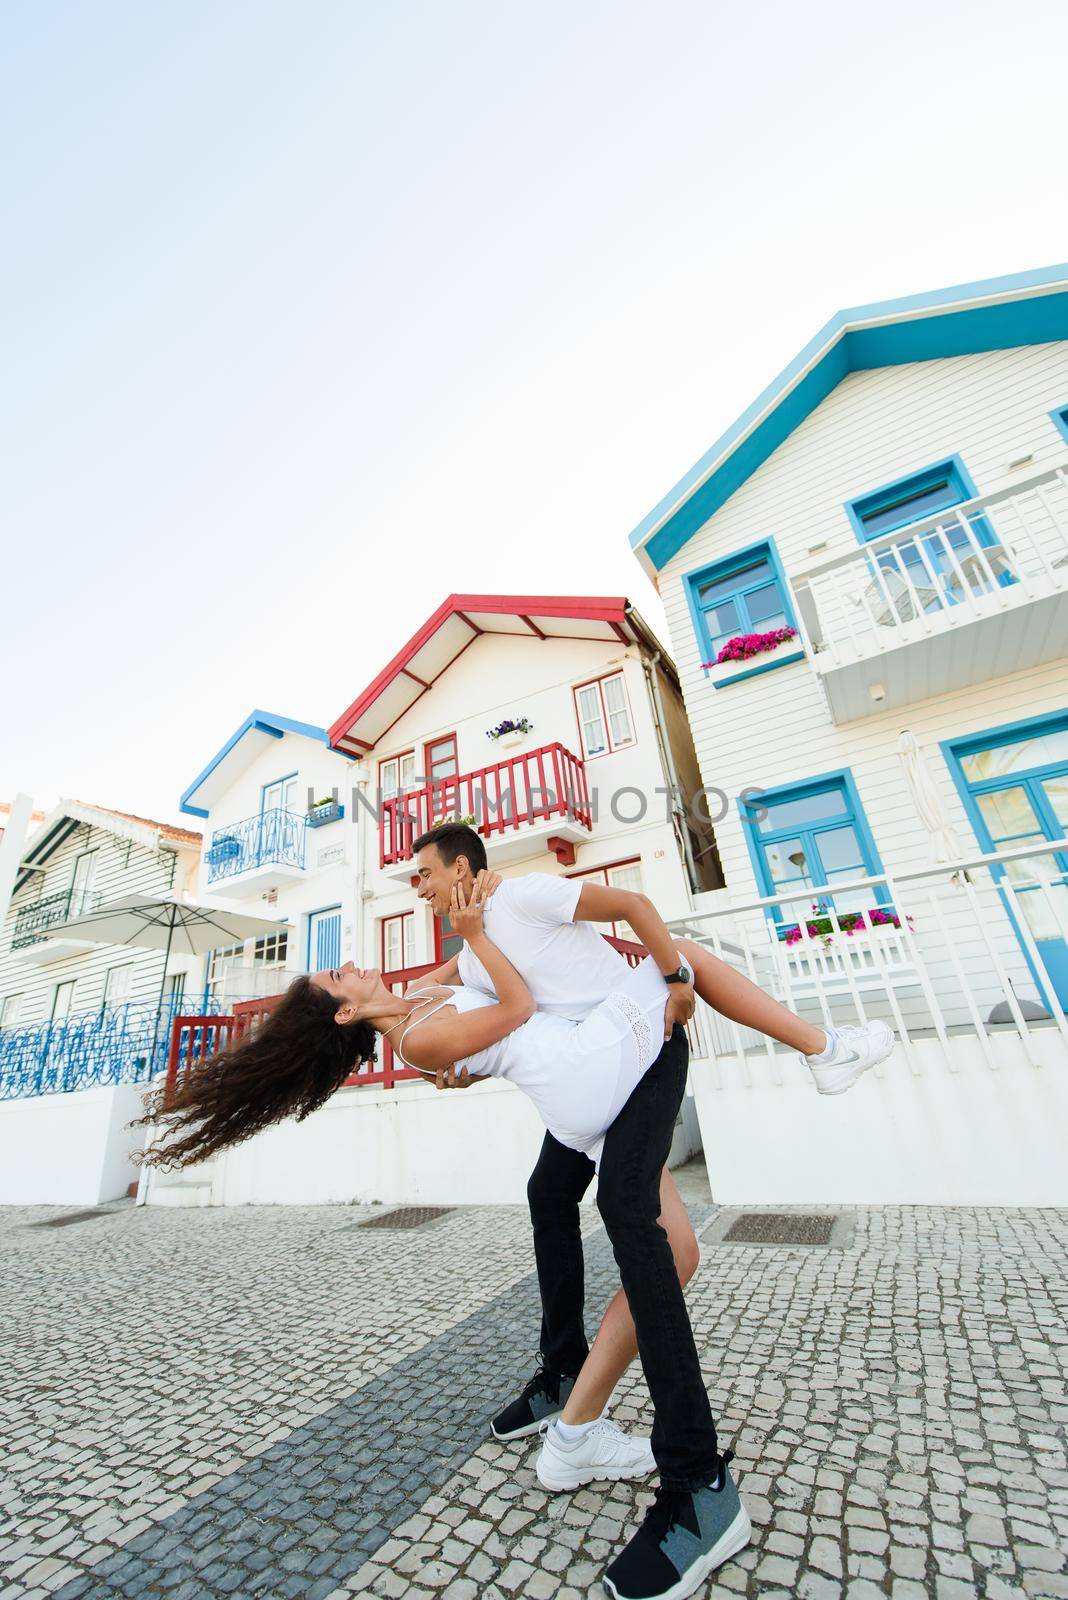 Young couple have fun and smiles and looks each others in Aveiro, Portugal near colourful and peaceful houses. Lifestyle. Having fun, laughs, smiles